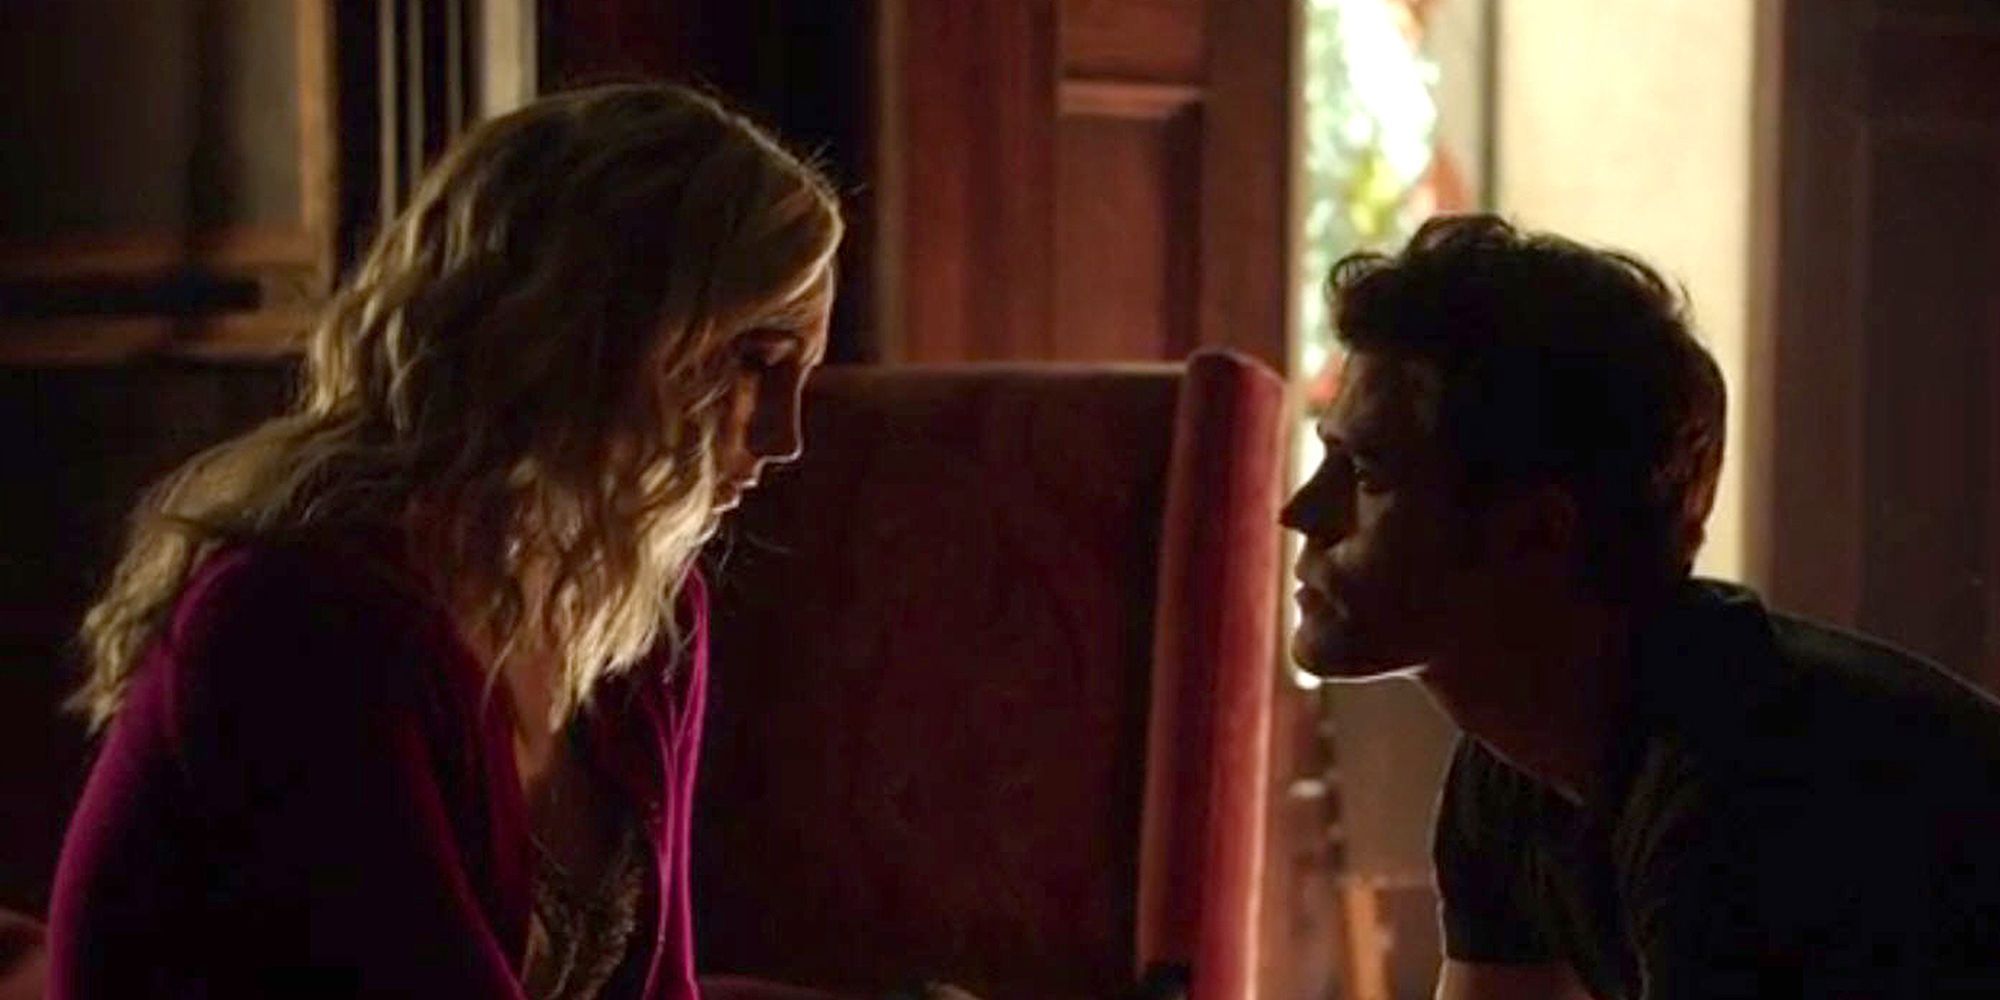 Stefan and Caroline from The Vampire Diaries staring at each other